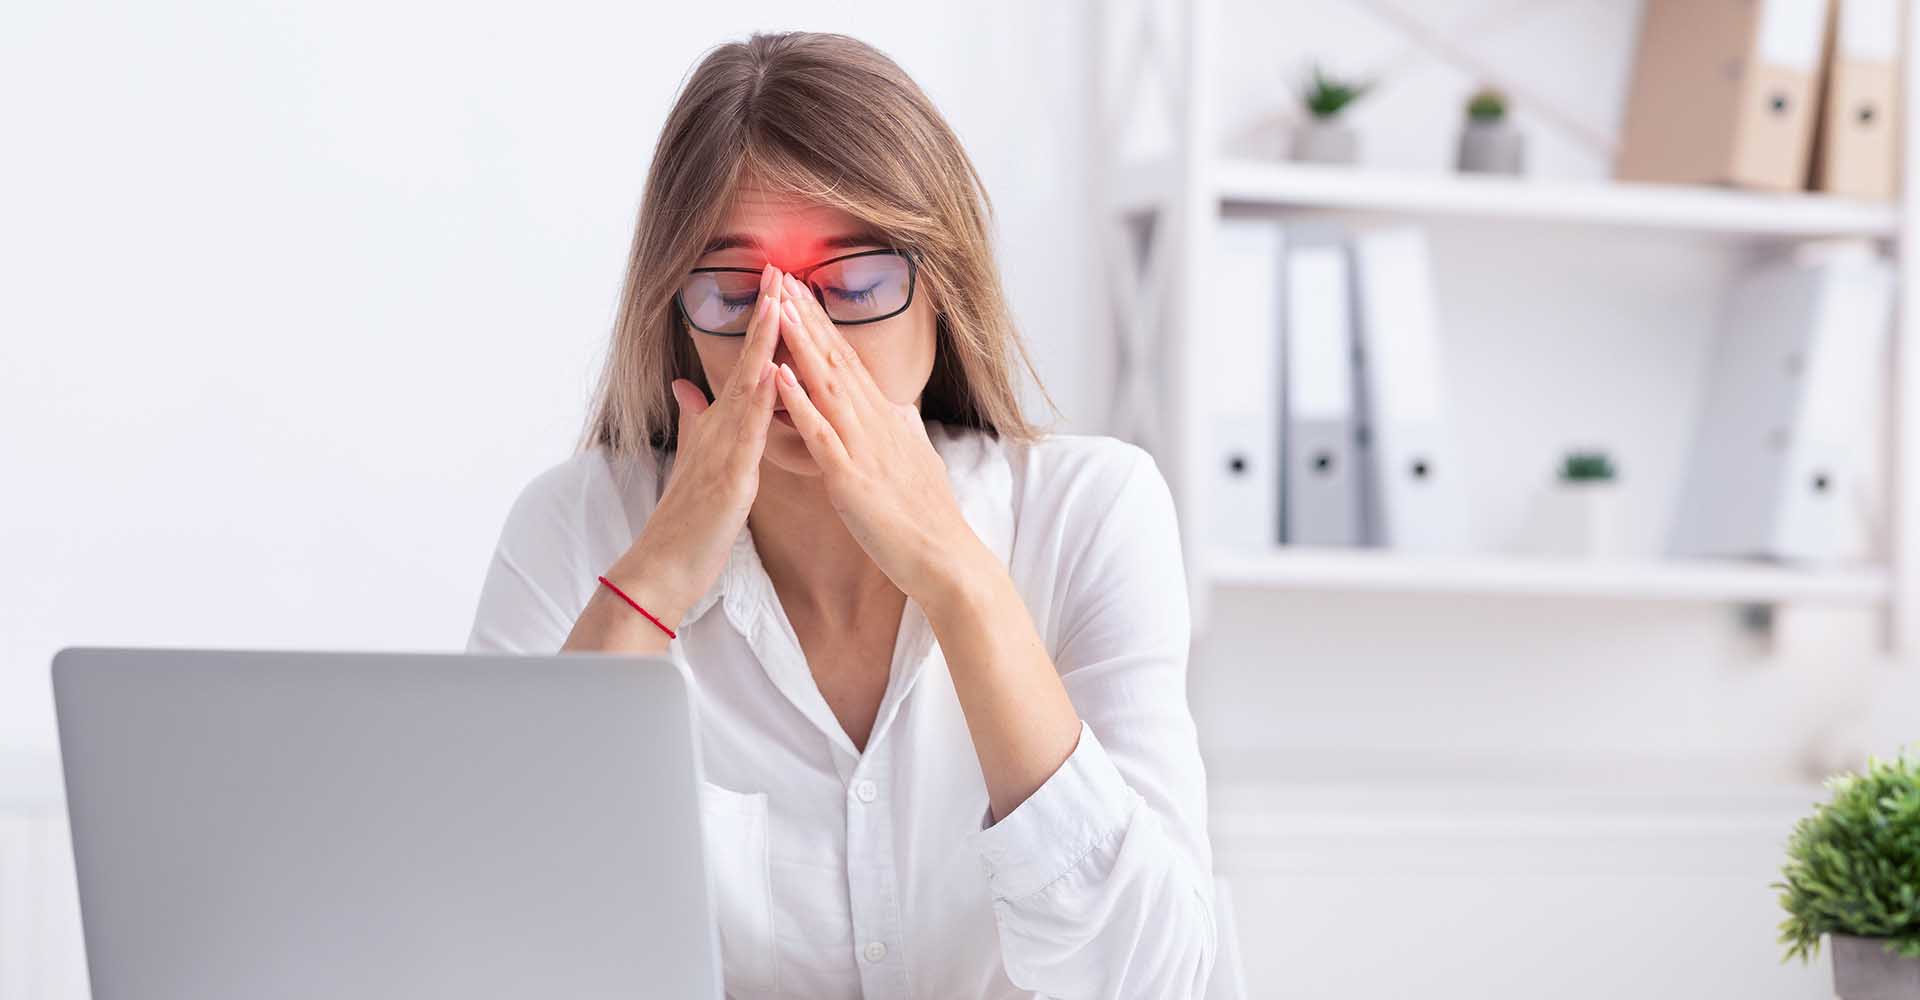 Businesswoman at work suffering srom sinus pain touching her nose and with both hands